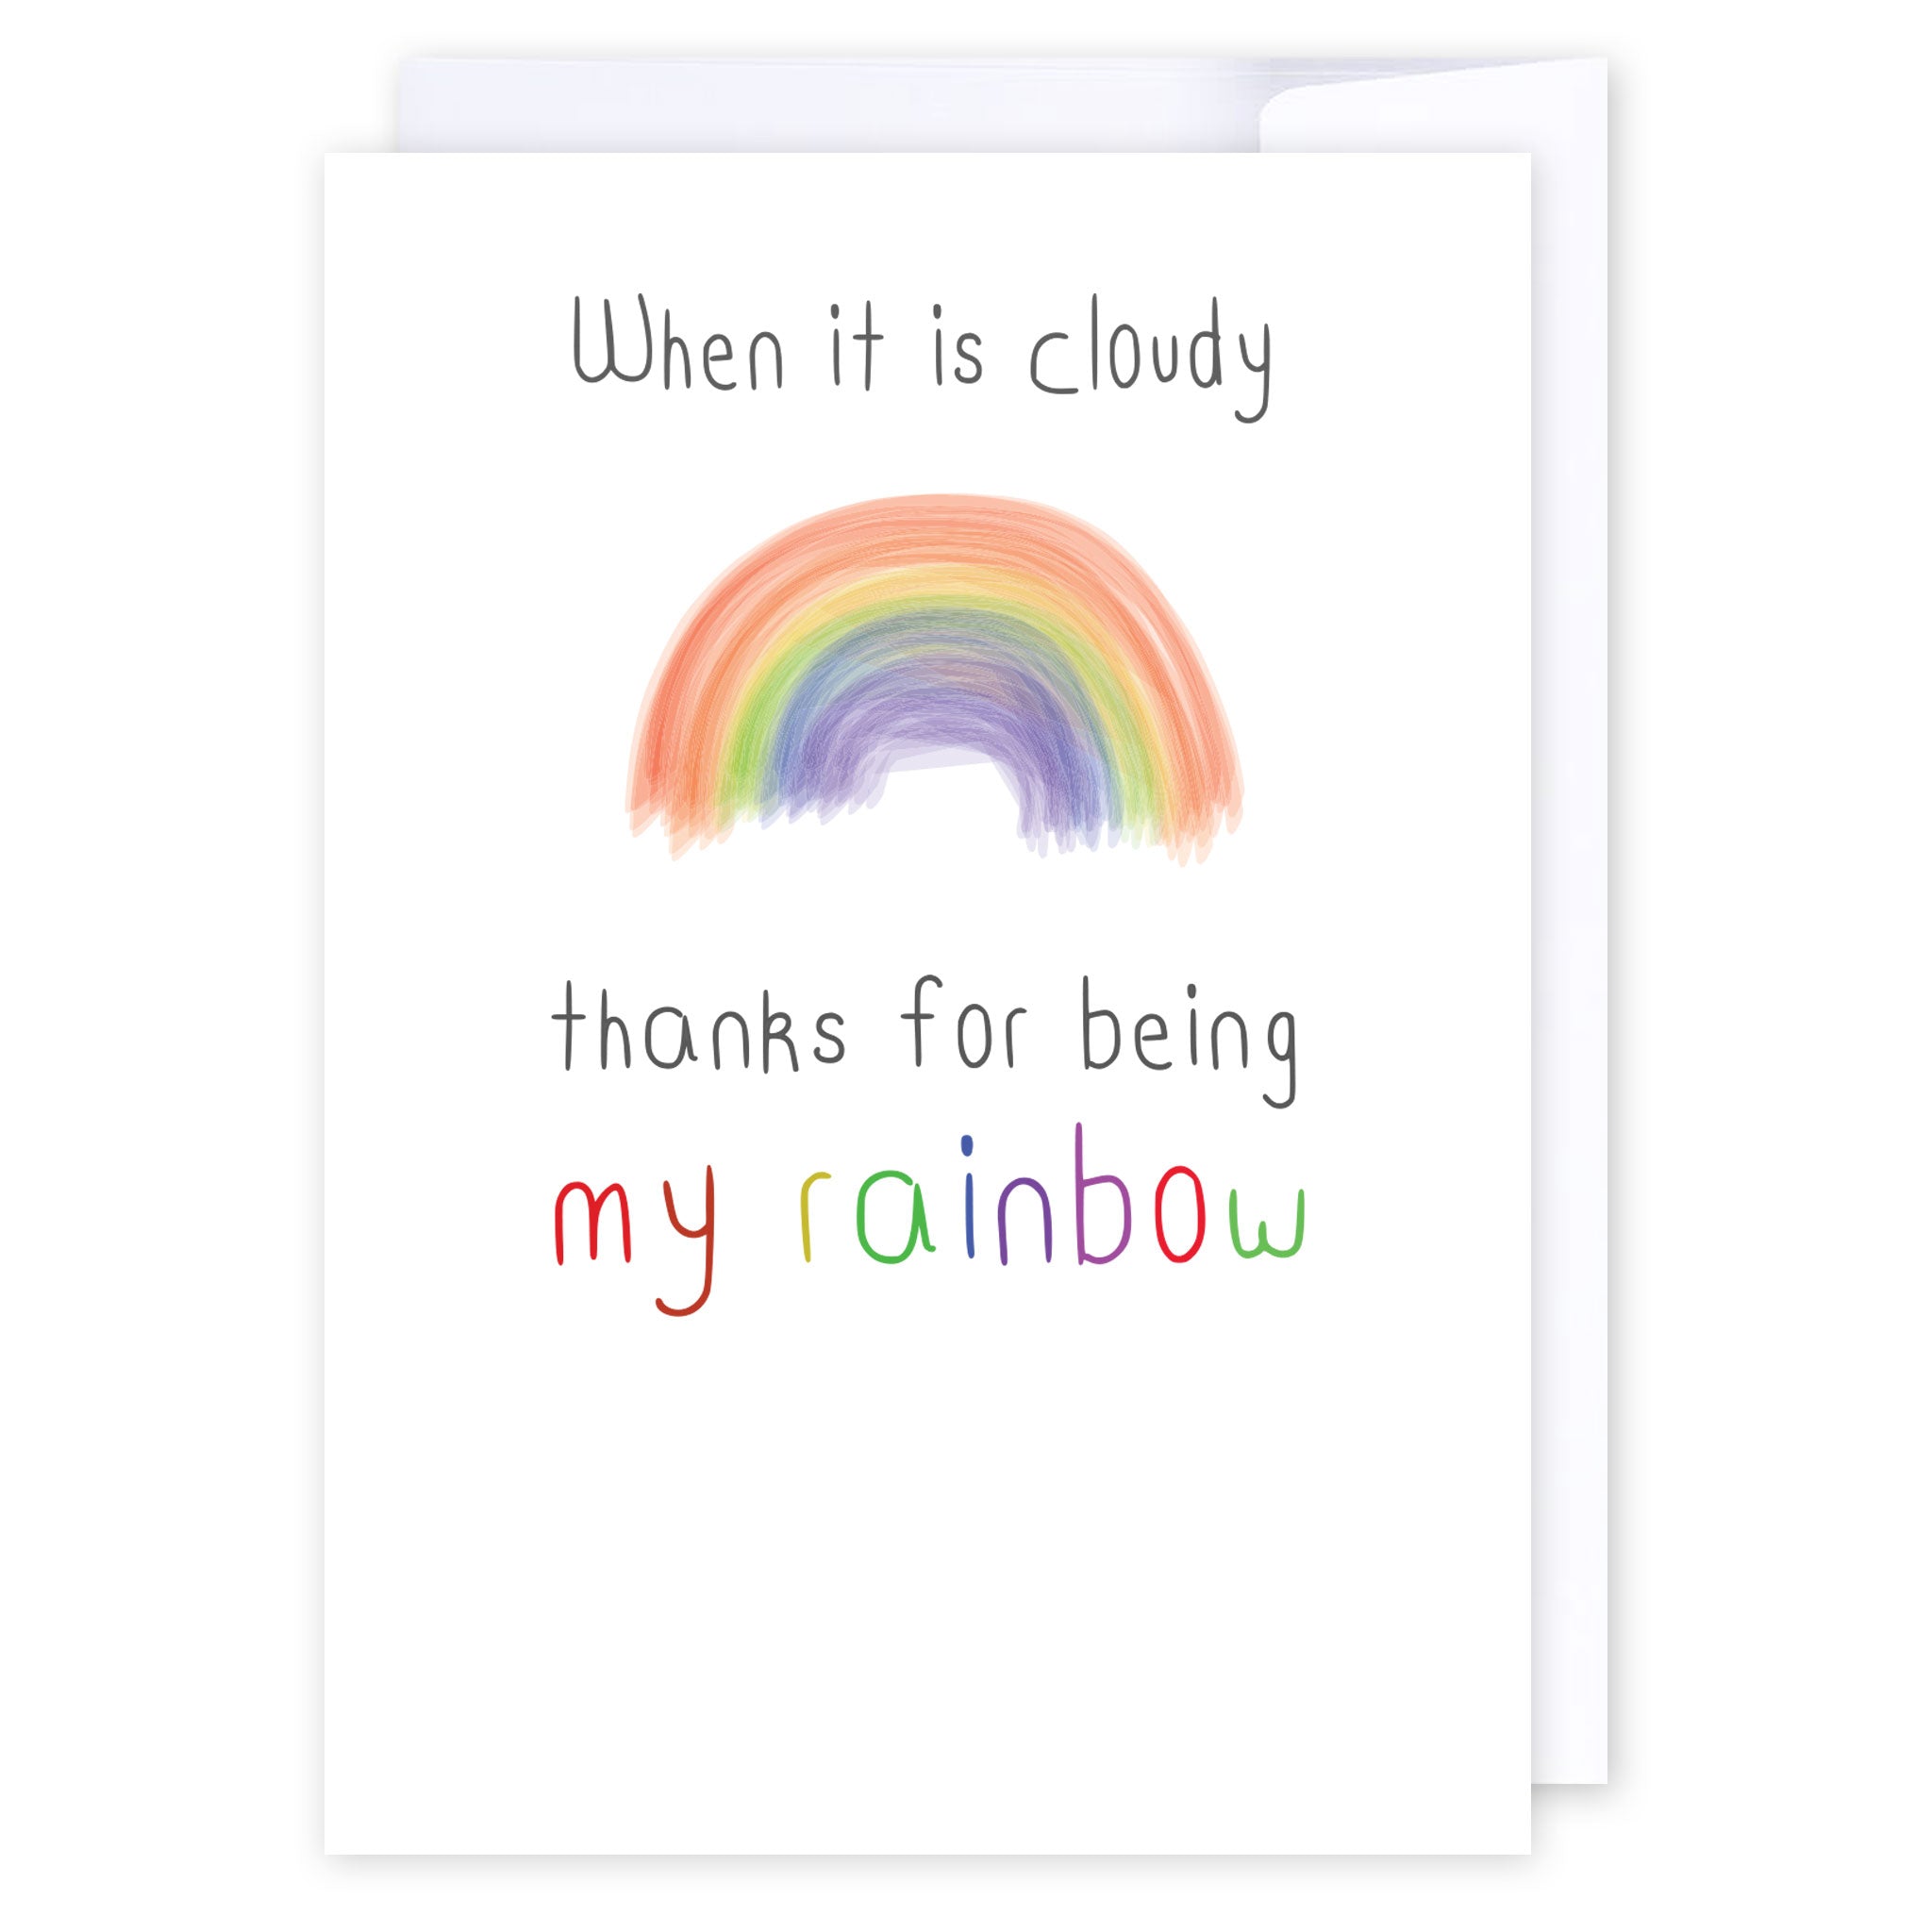 Thanks for being my rainbow